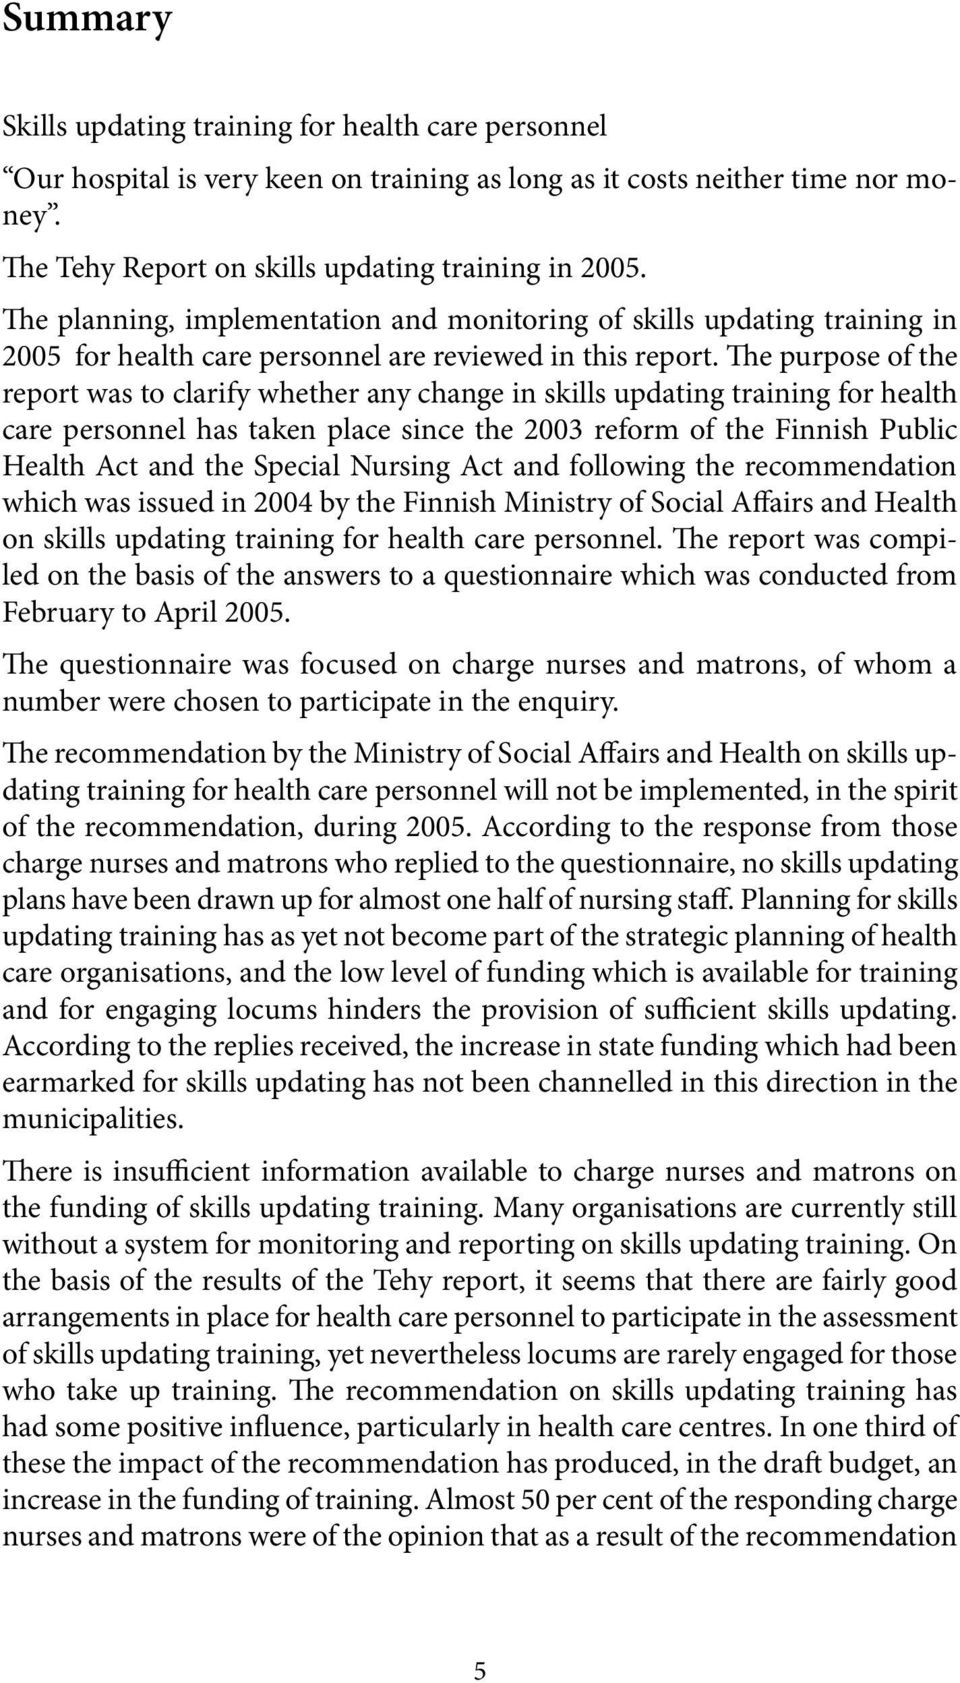 The purpose of the report was to clarify whether any change in skills updating training for health care personnel has taken place since the 2003 reform of the Finnish Public Health Act and the